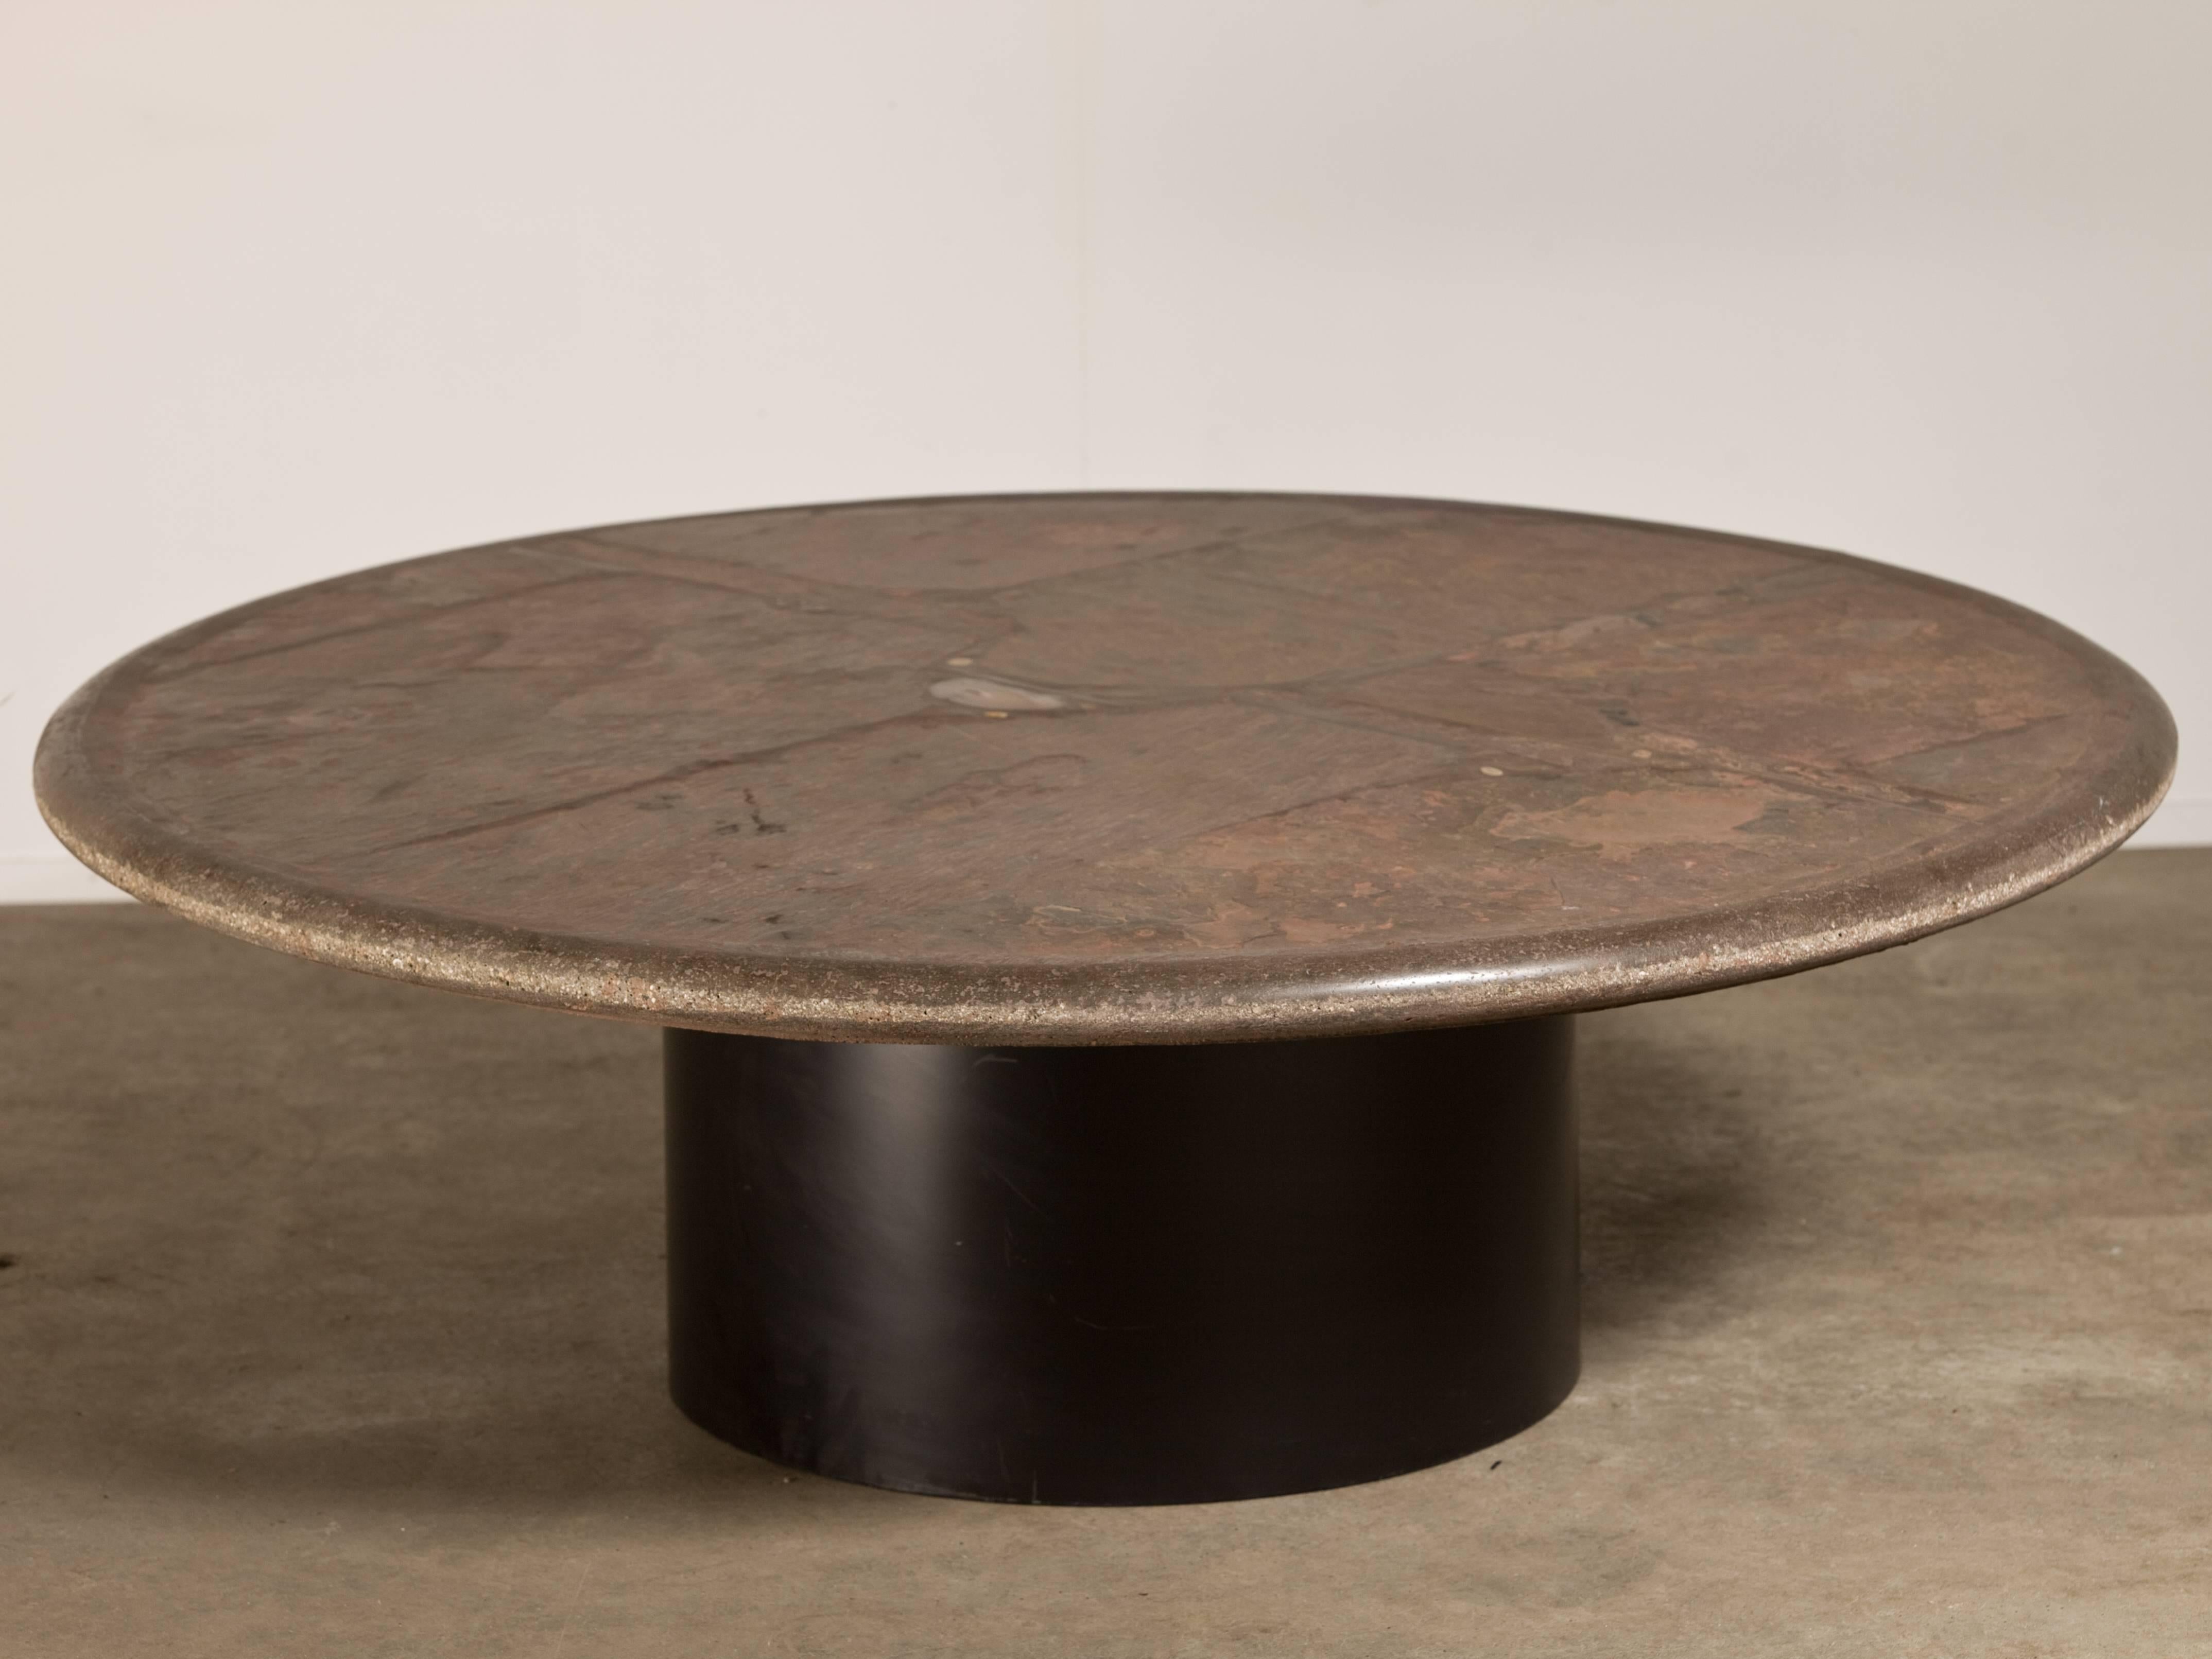 Beautiful slate stone coffee table by Paul Kingma -signed and dated 1989. This one has very nice soft pink shades and an inlay of various gem stones and copper pieces. The base that holds the top consists of a circle of black lacquered metal every